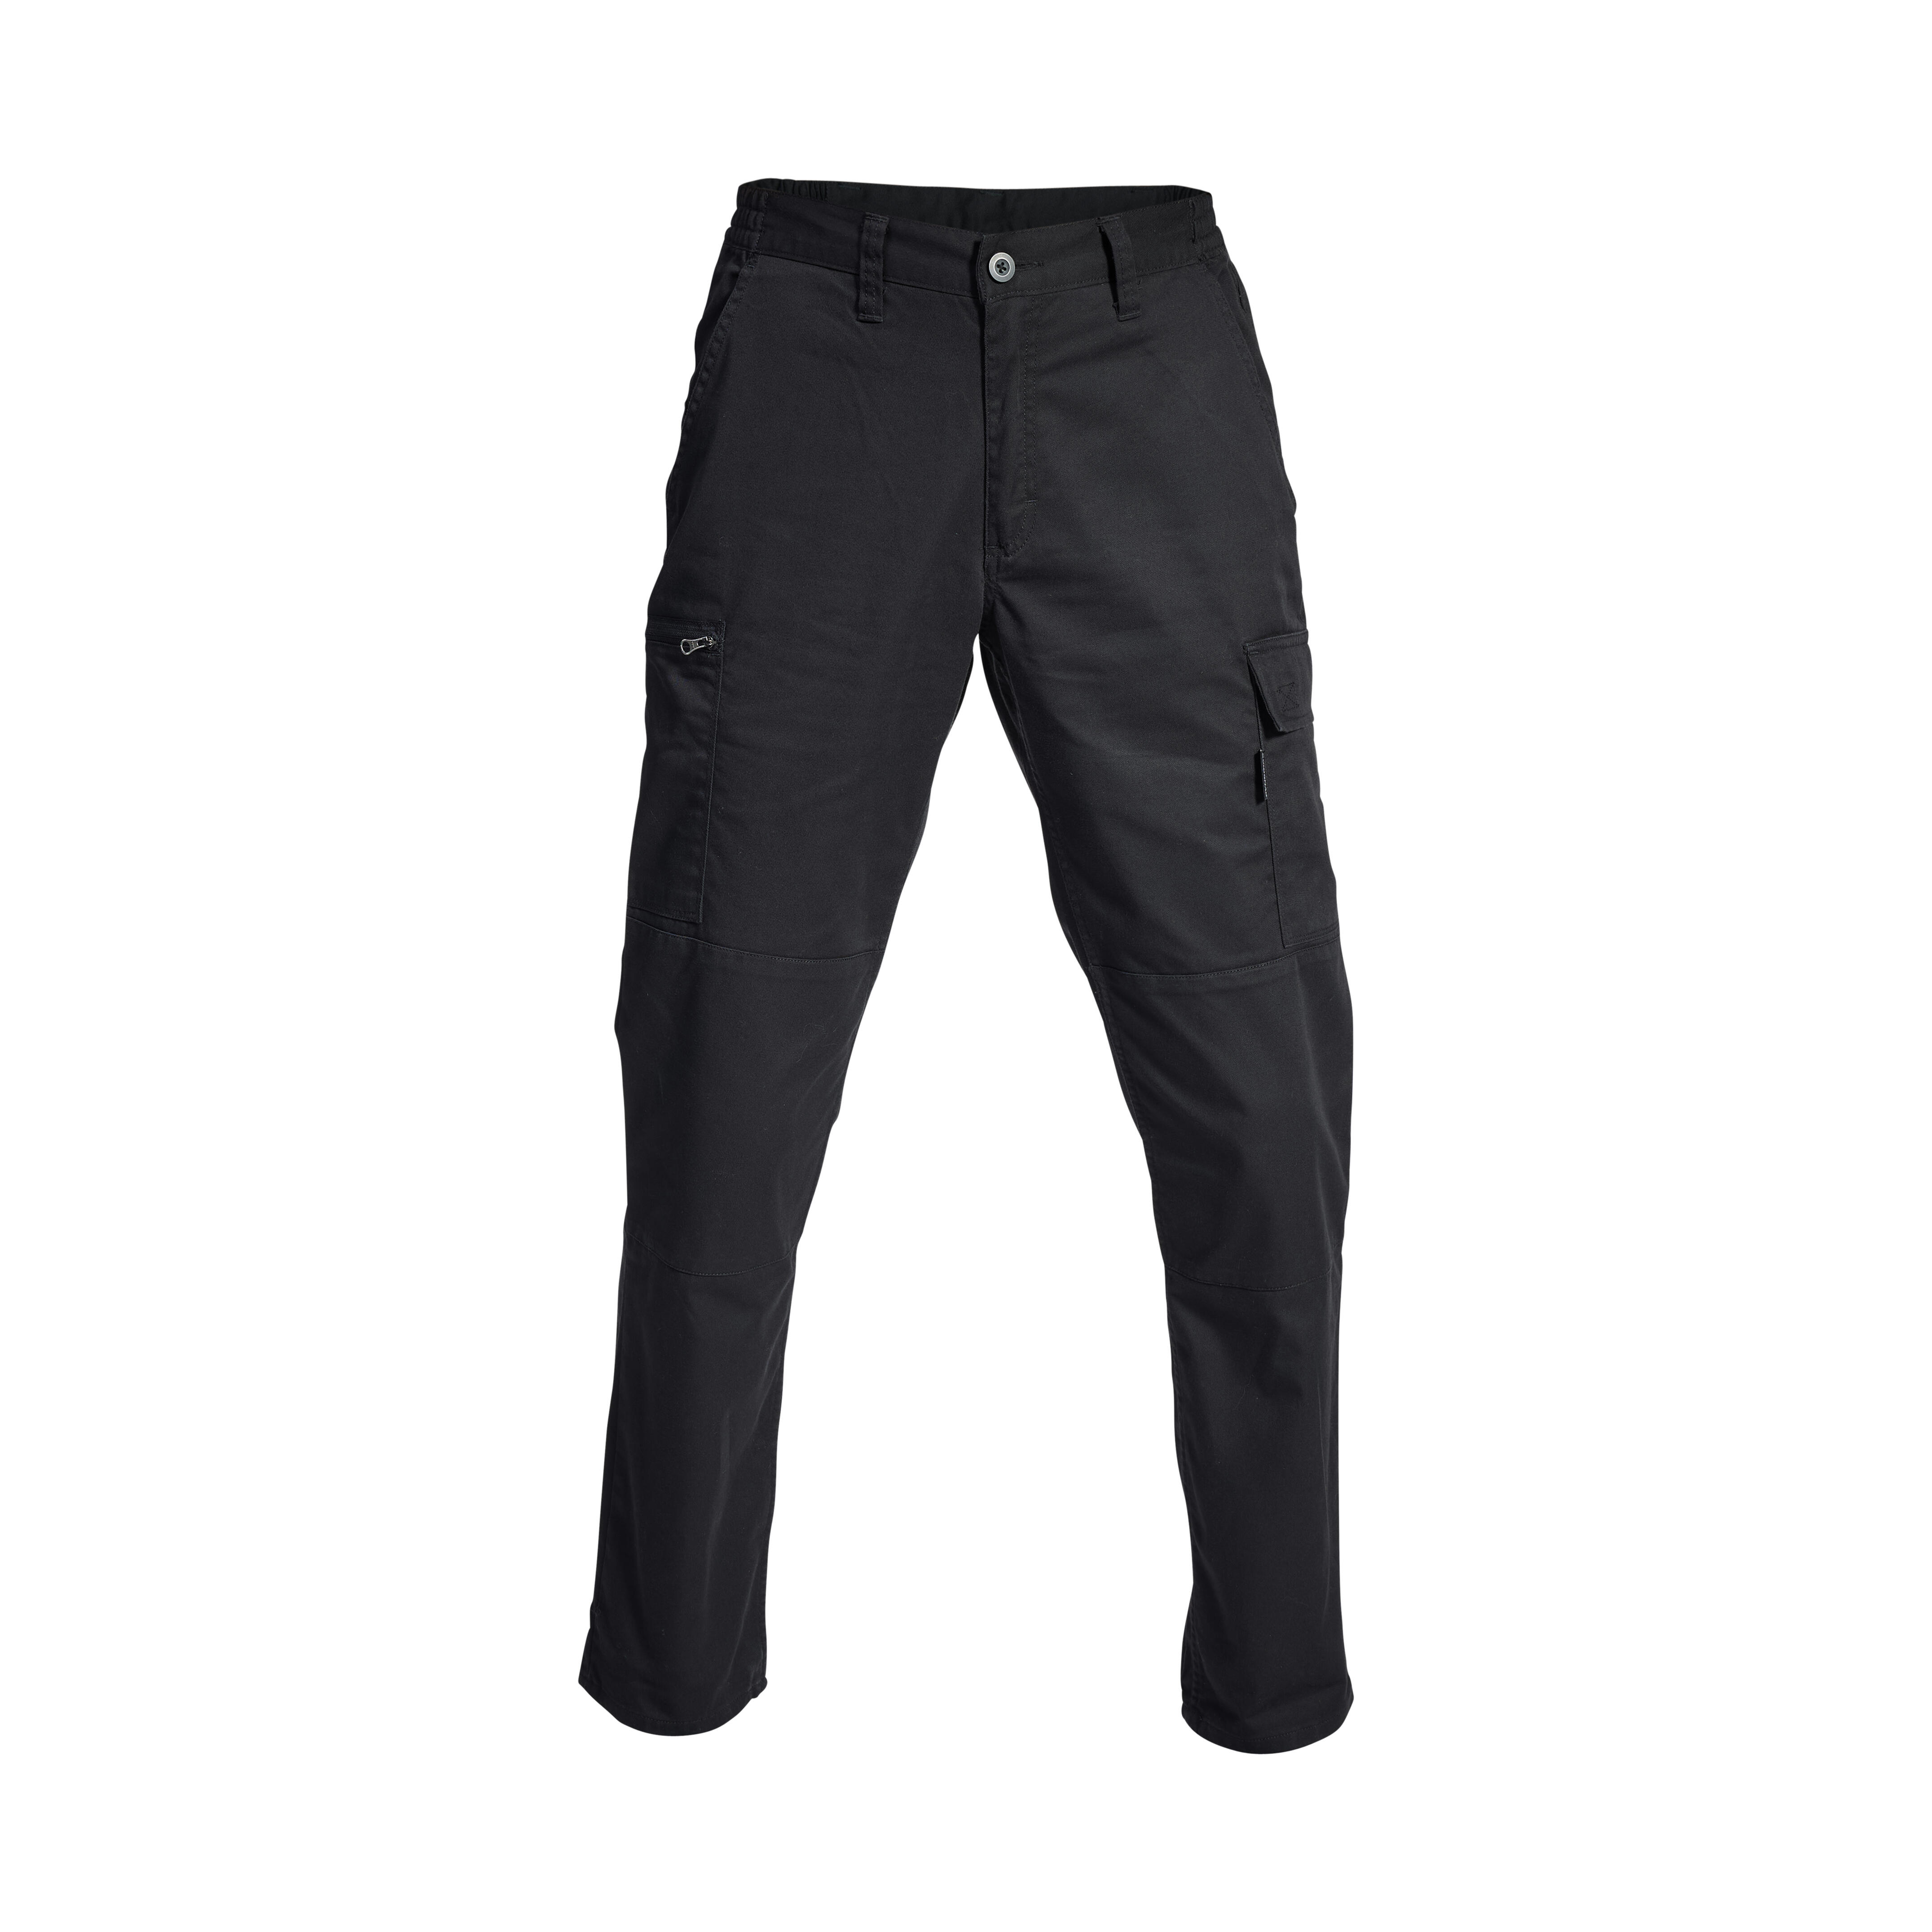 Details more than 84 tactical cargo trousers - in.coedo.com.vn